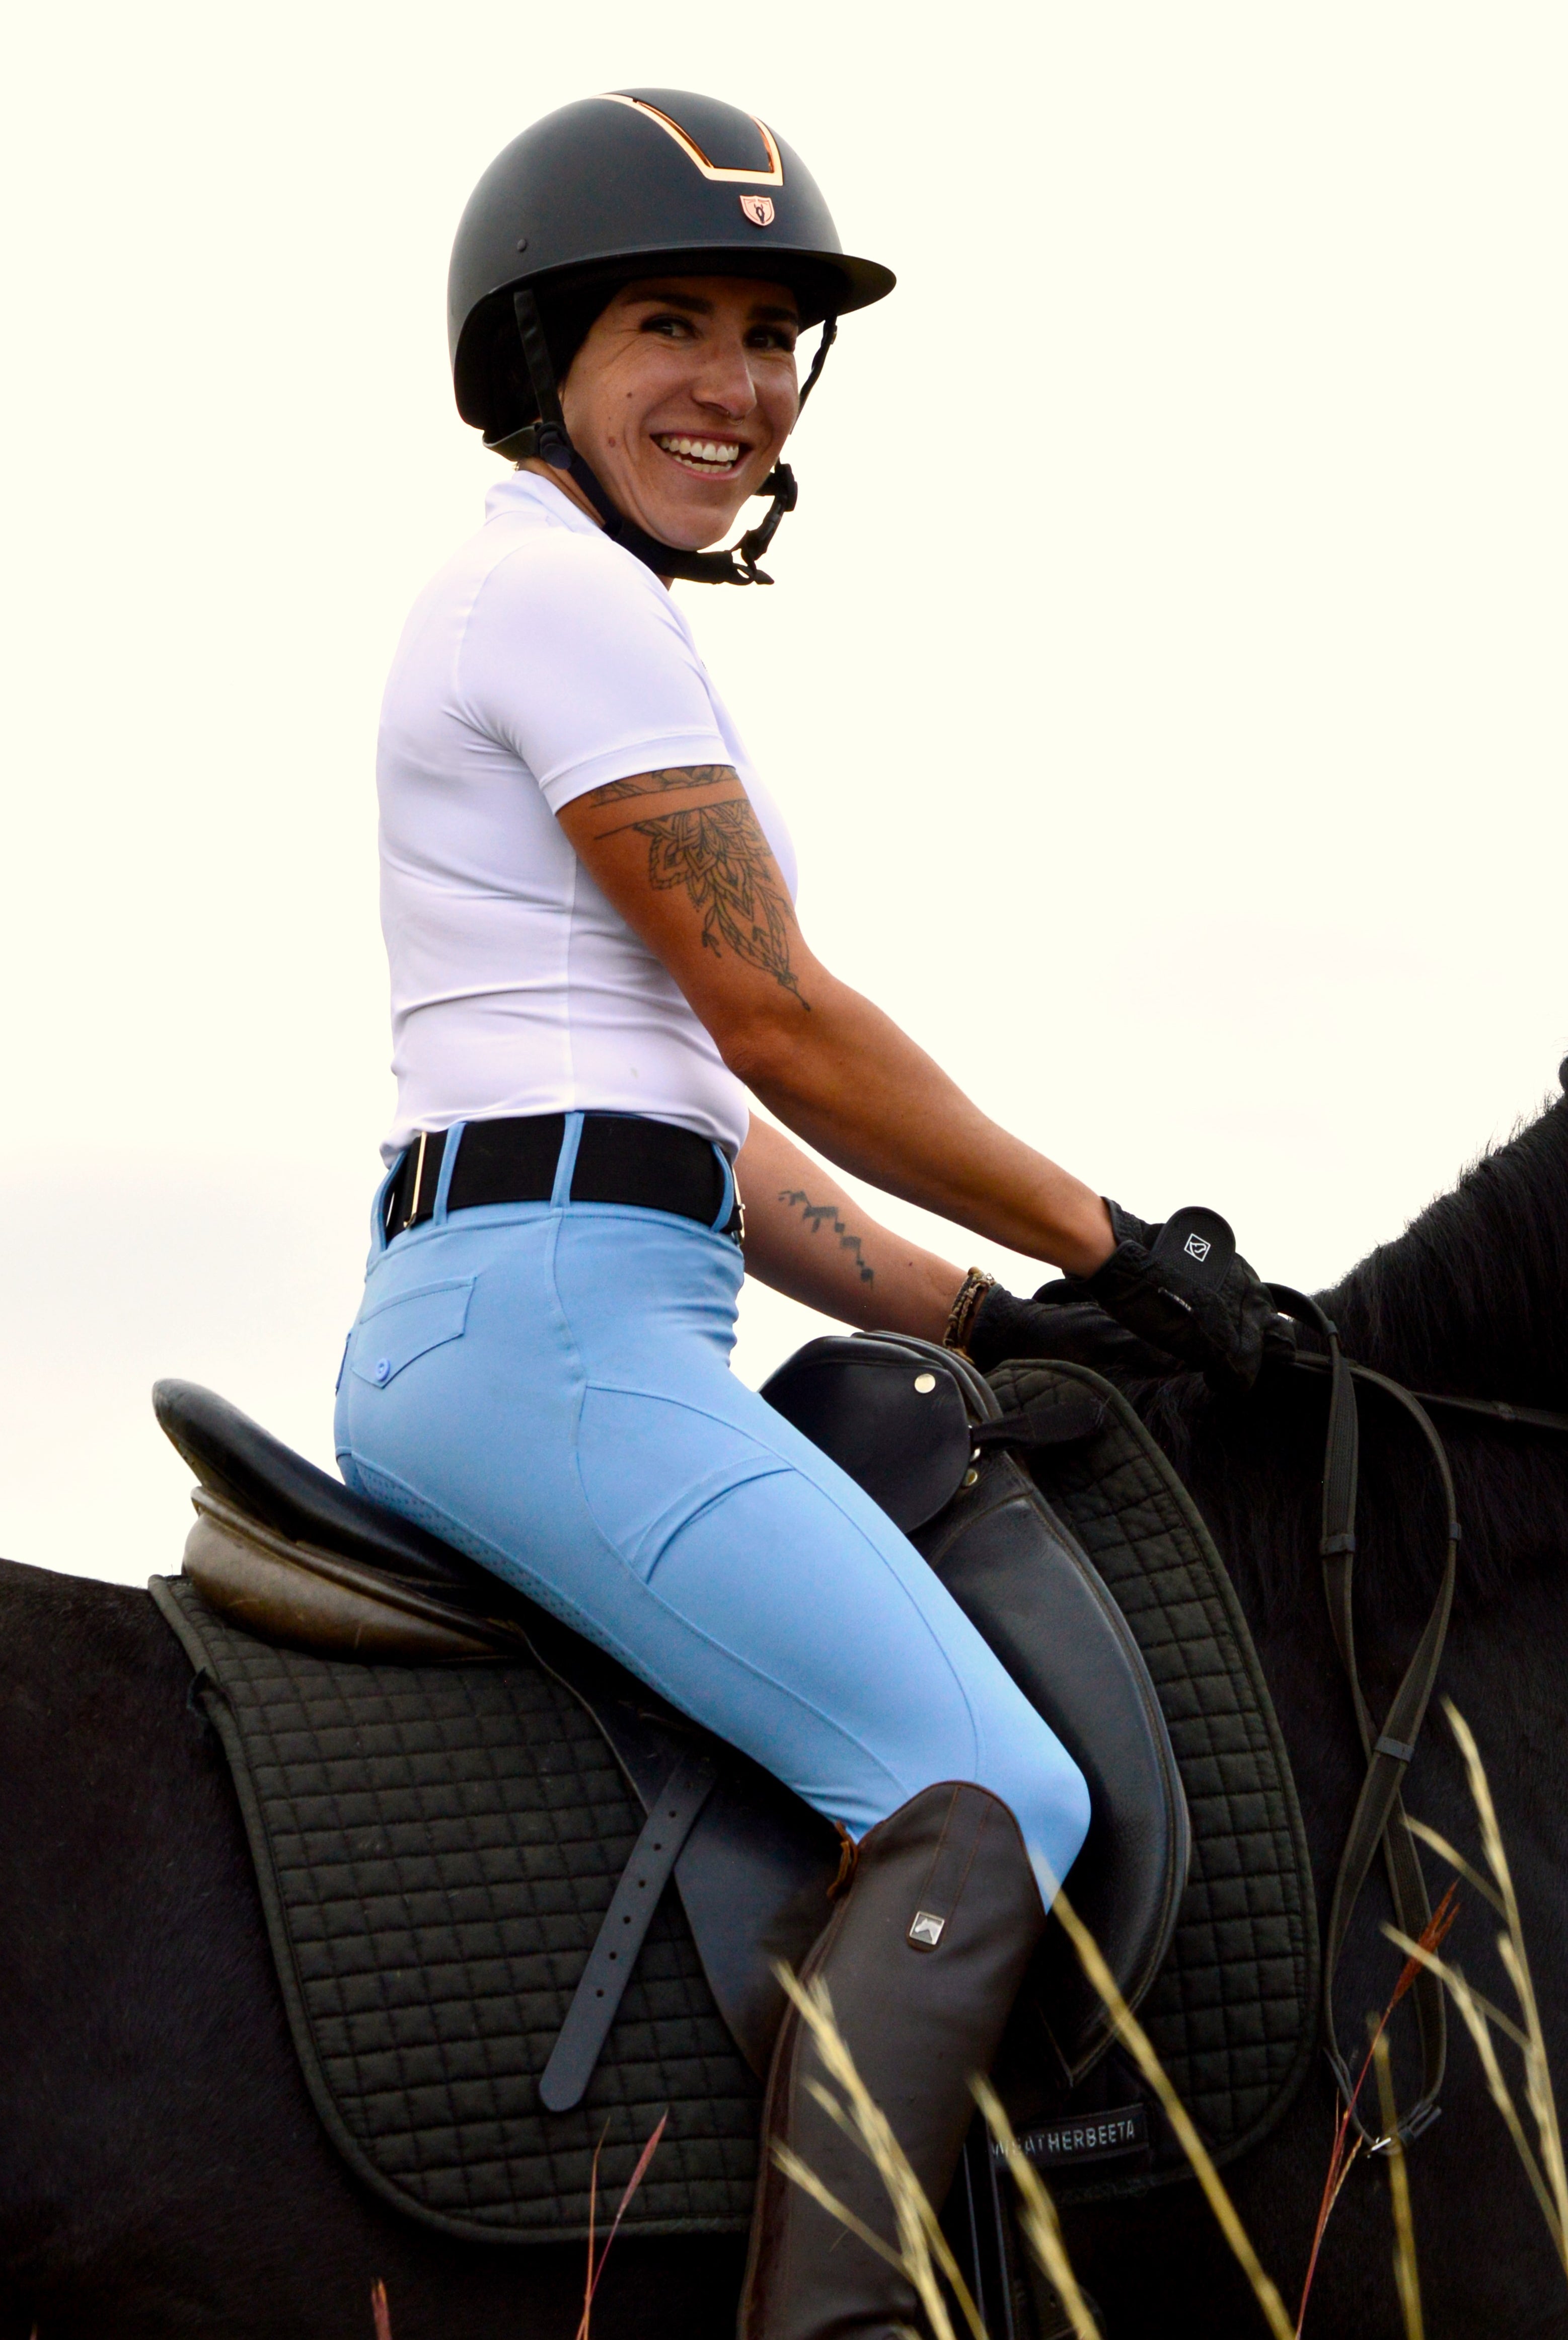 Stunning riding tights in baby blue matched with white equestrian base layer and black snaffle belt